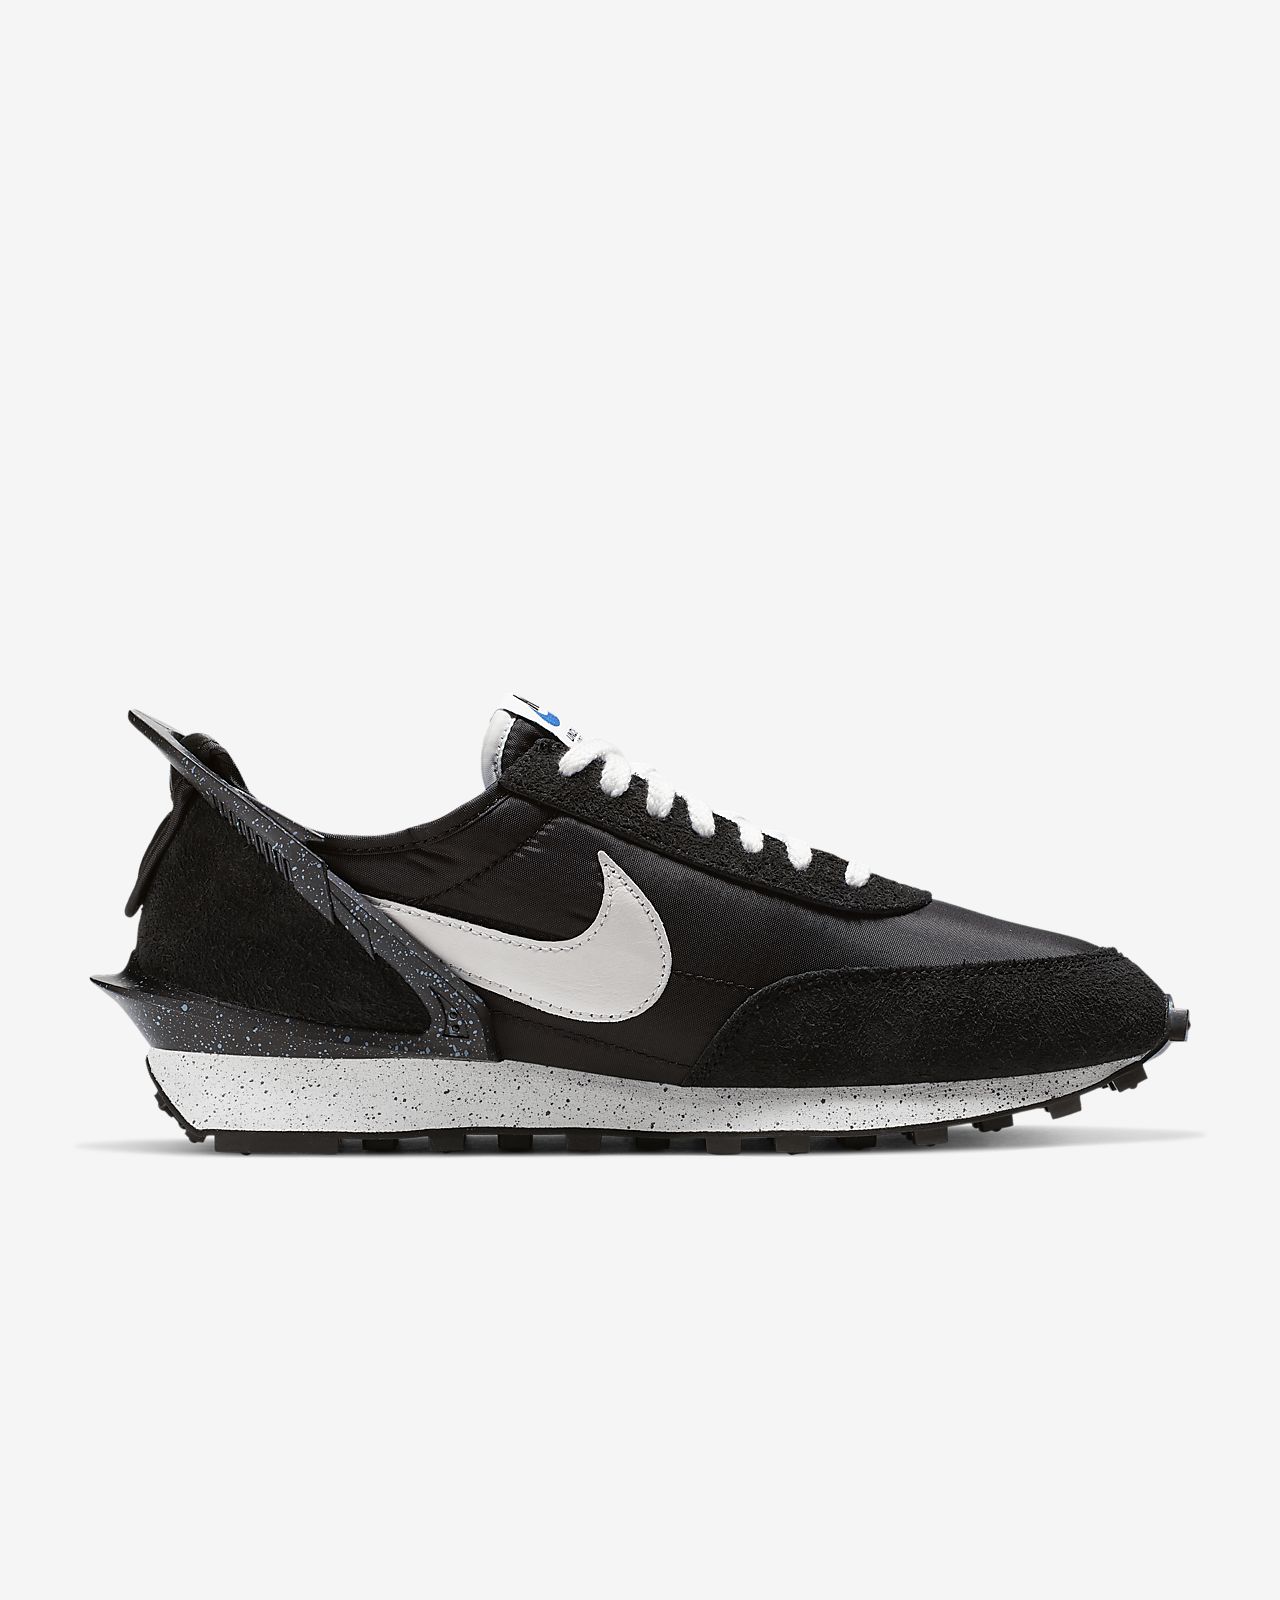 Undercover x Nike Daybreak Mens Running Shoes Sneakers Trainers